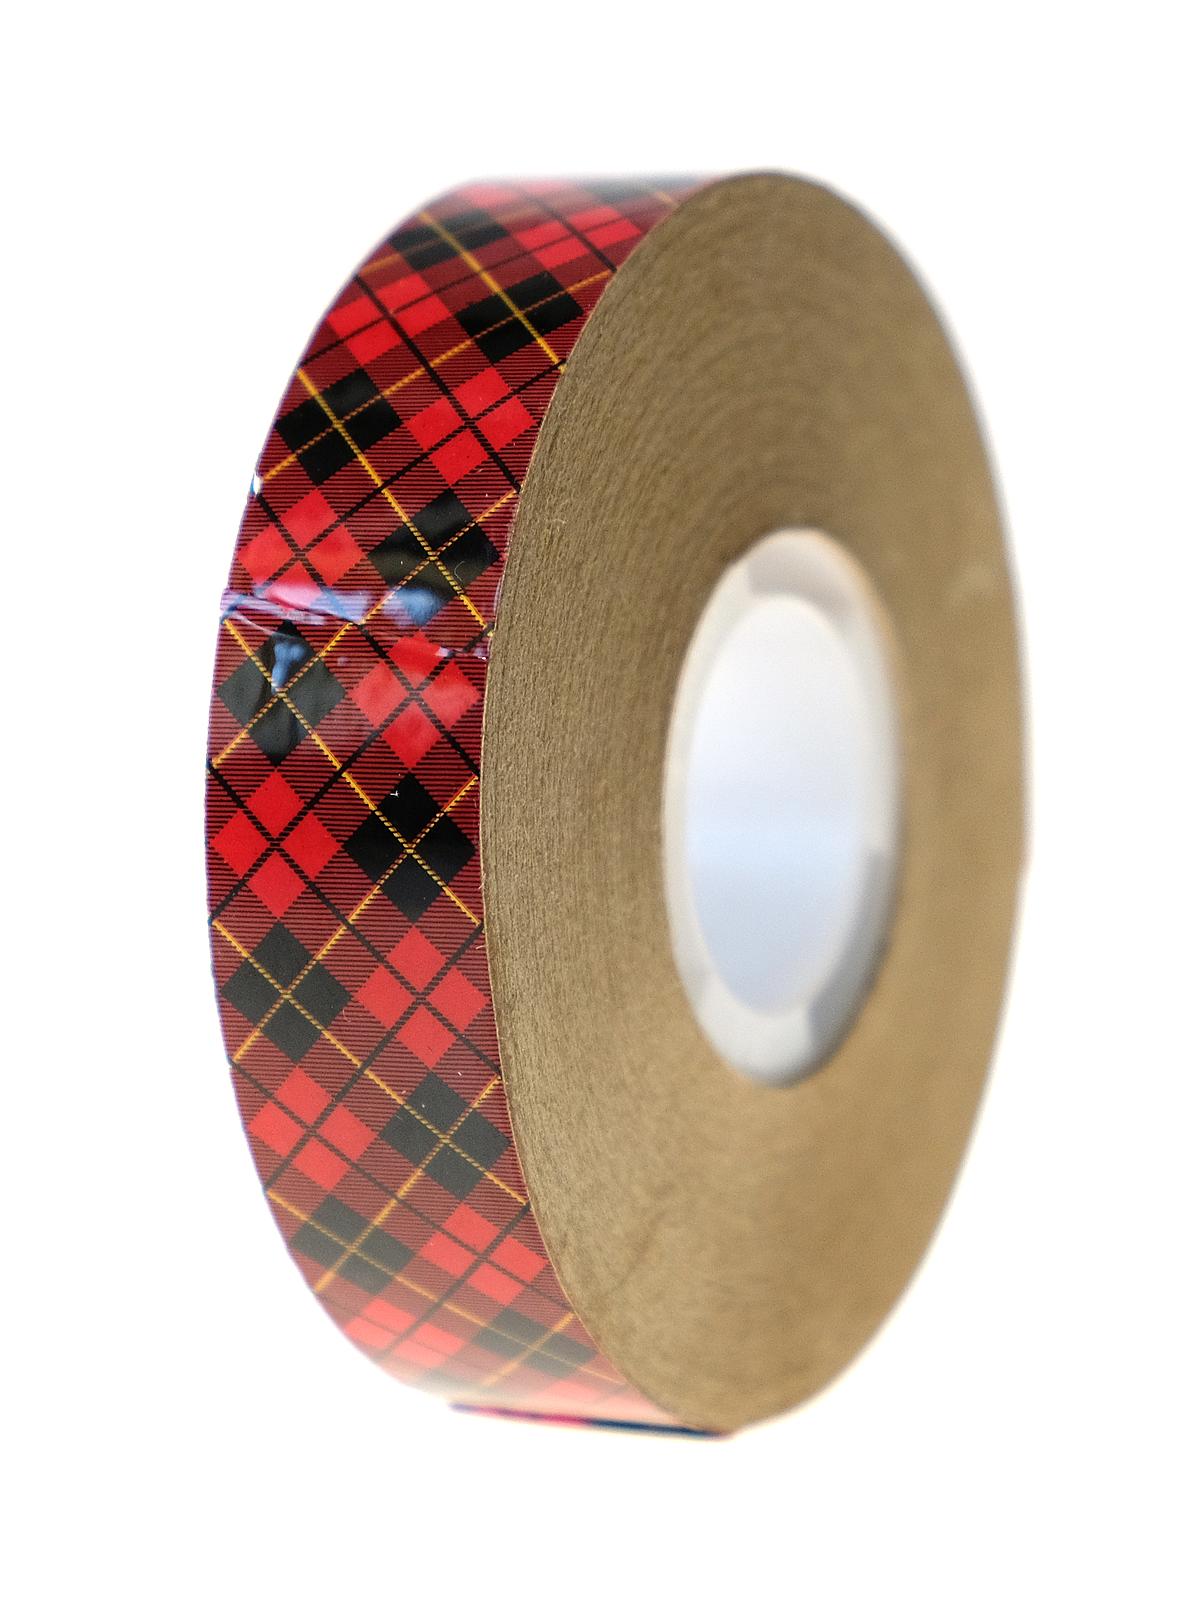 Scotch Atg Adhesive Transfer Tape 924 3 4 In. X 36 Yd.